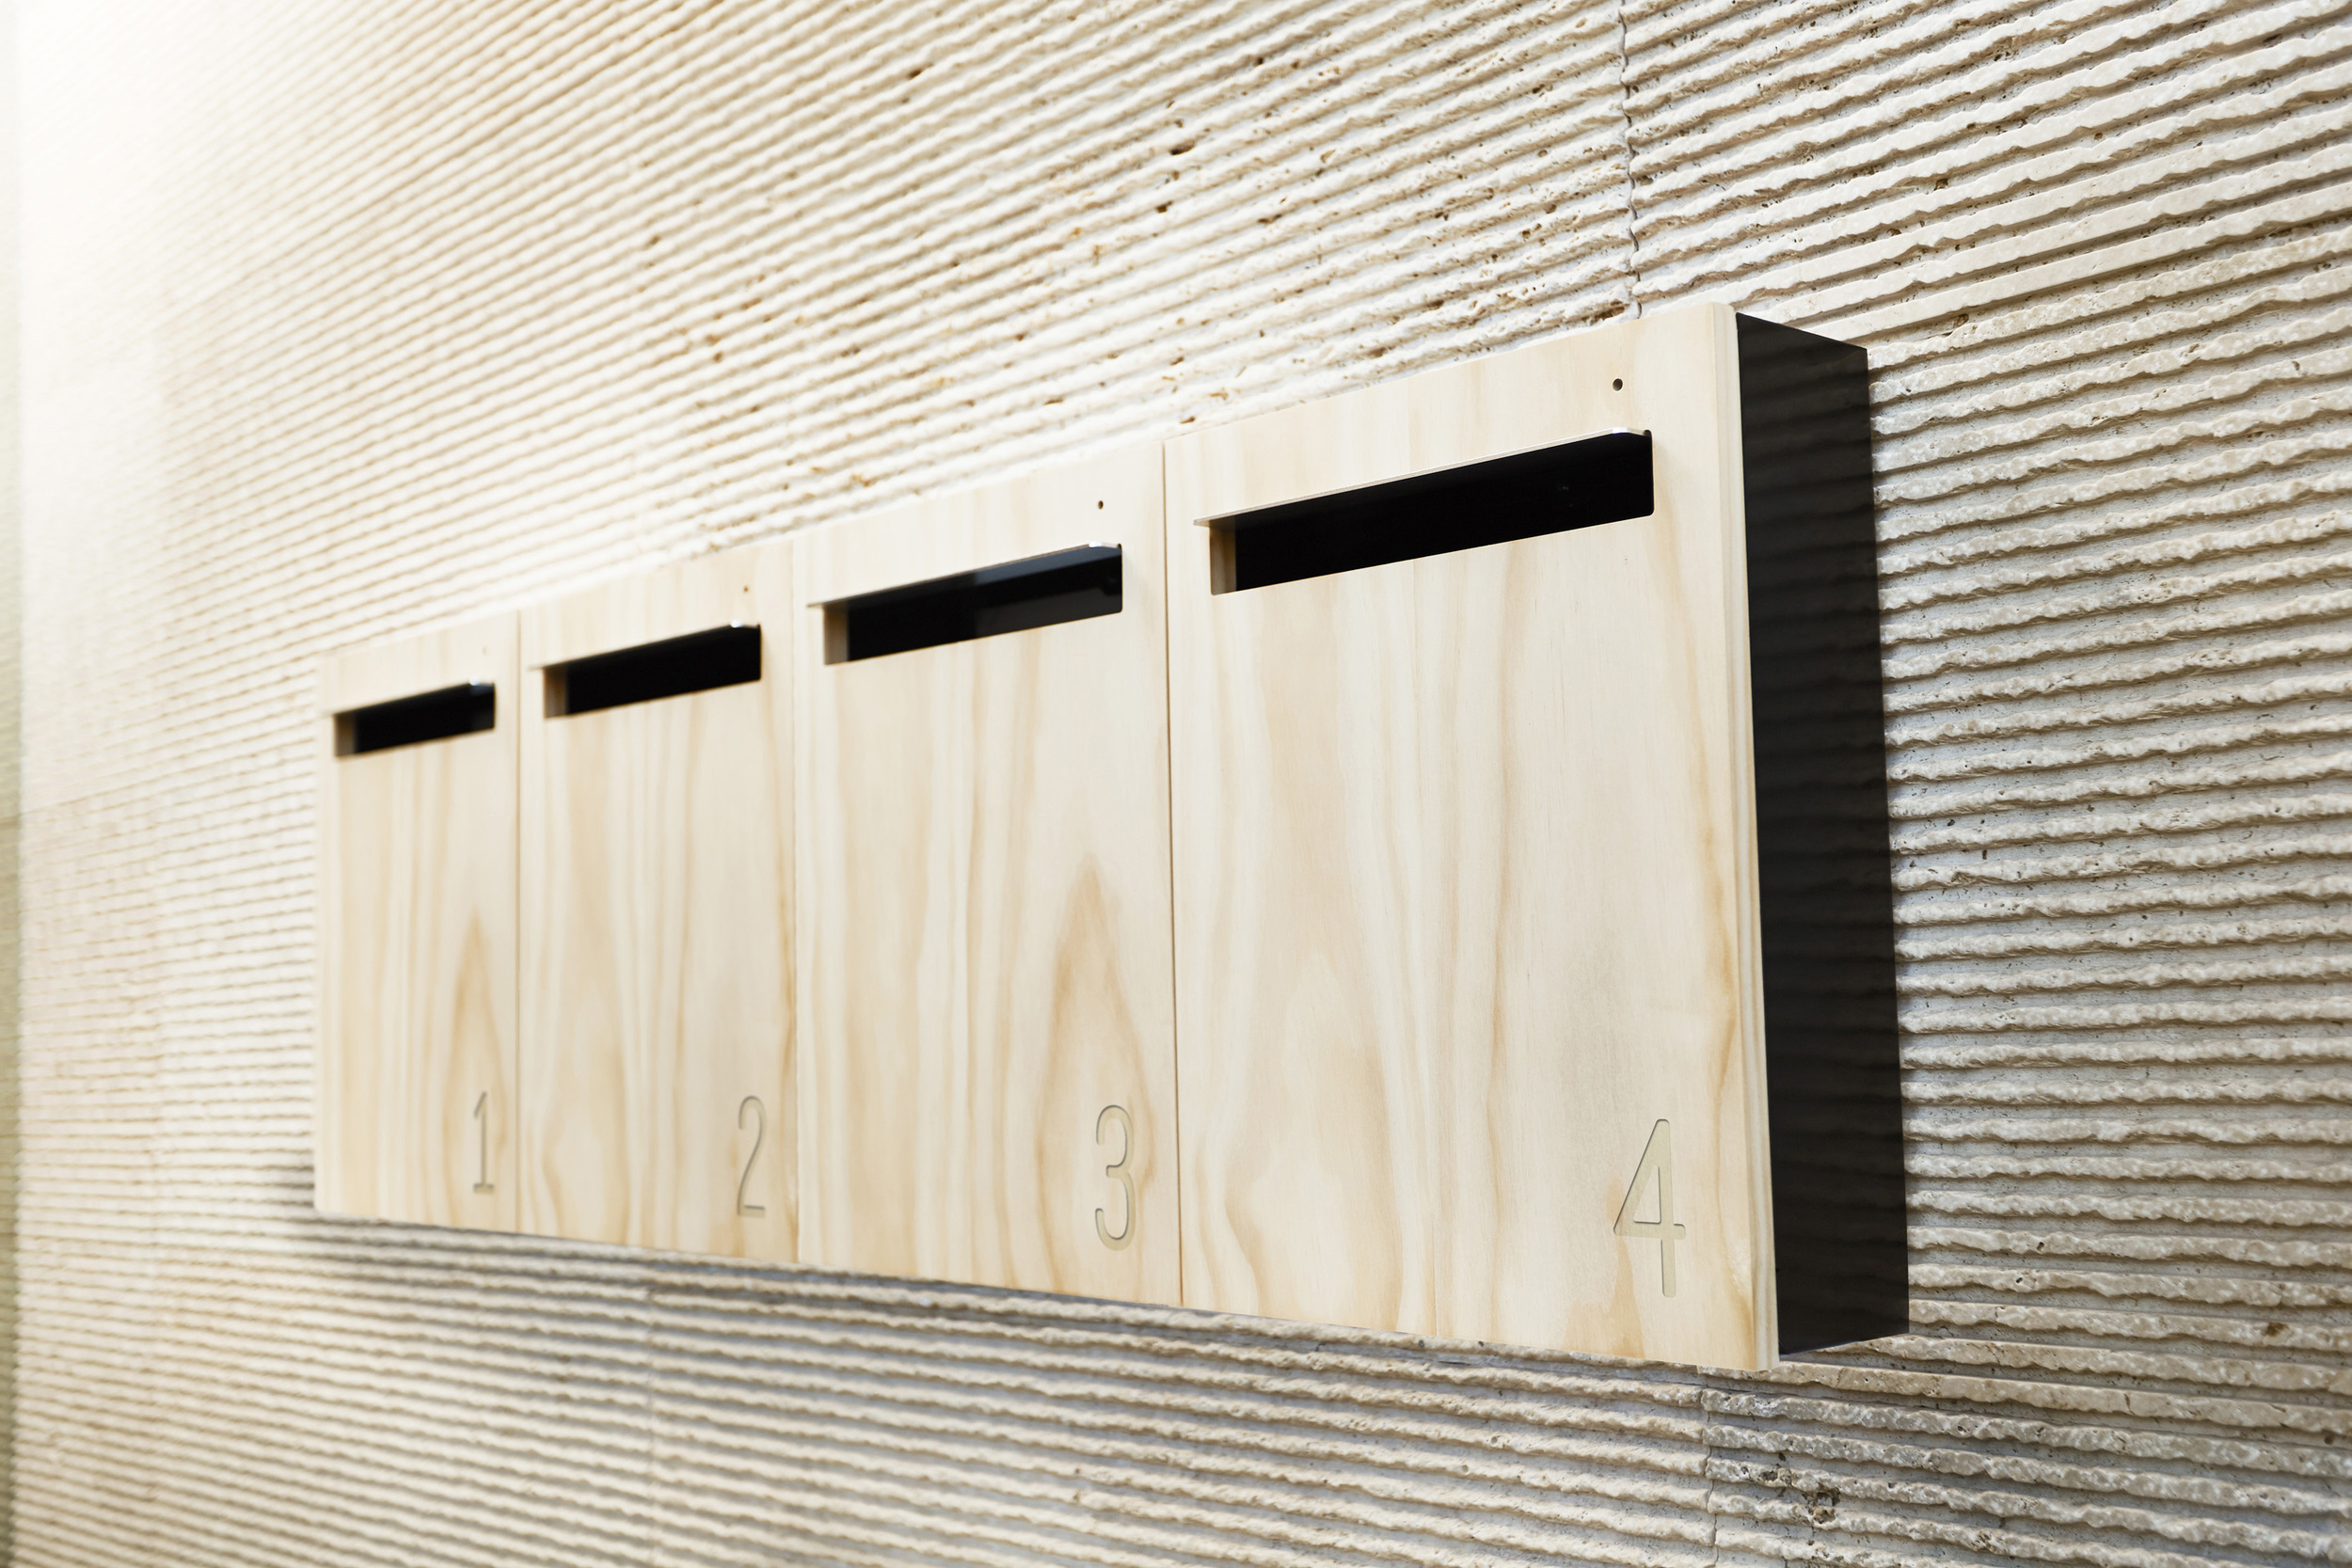 Multiple Wall Mounted Letter Boxes With Numbers